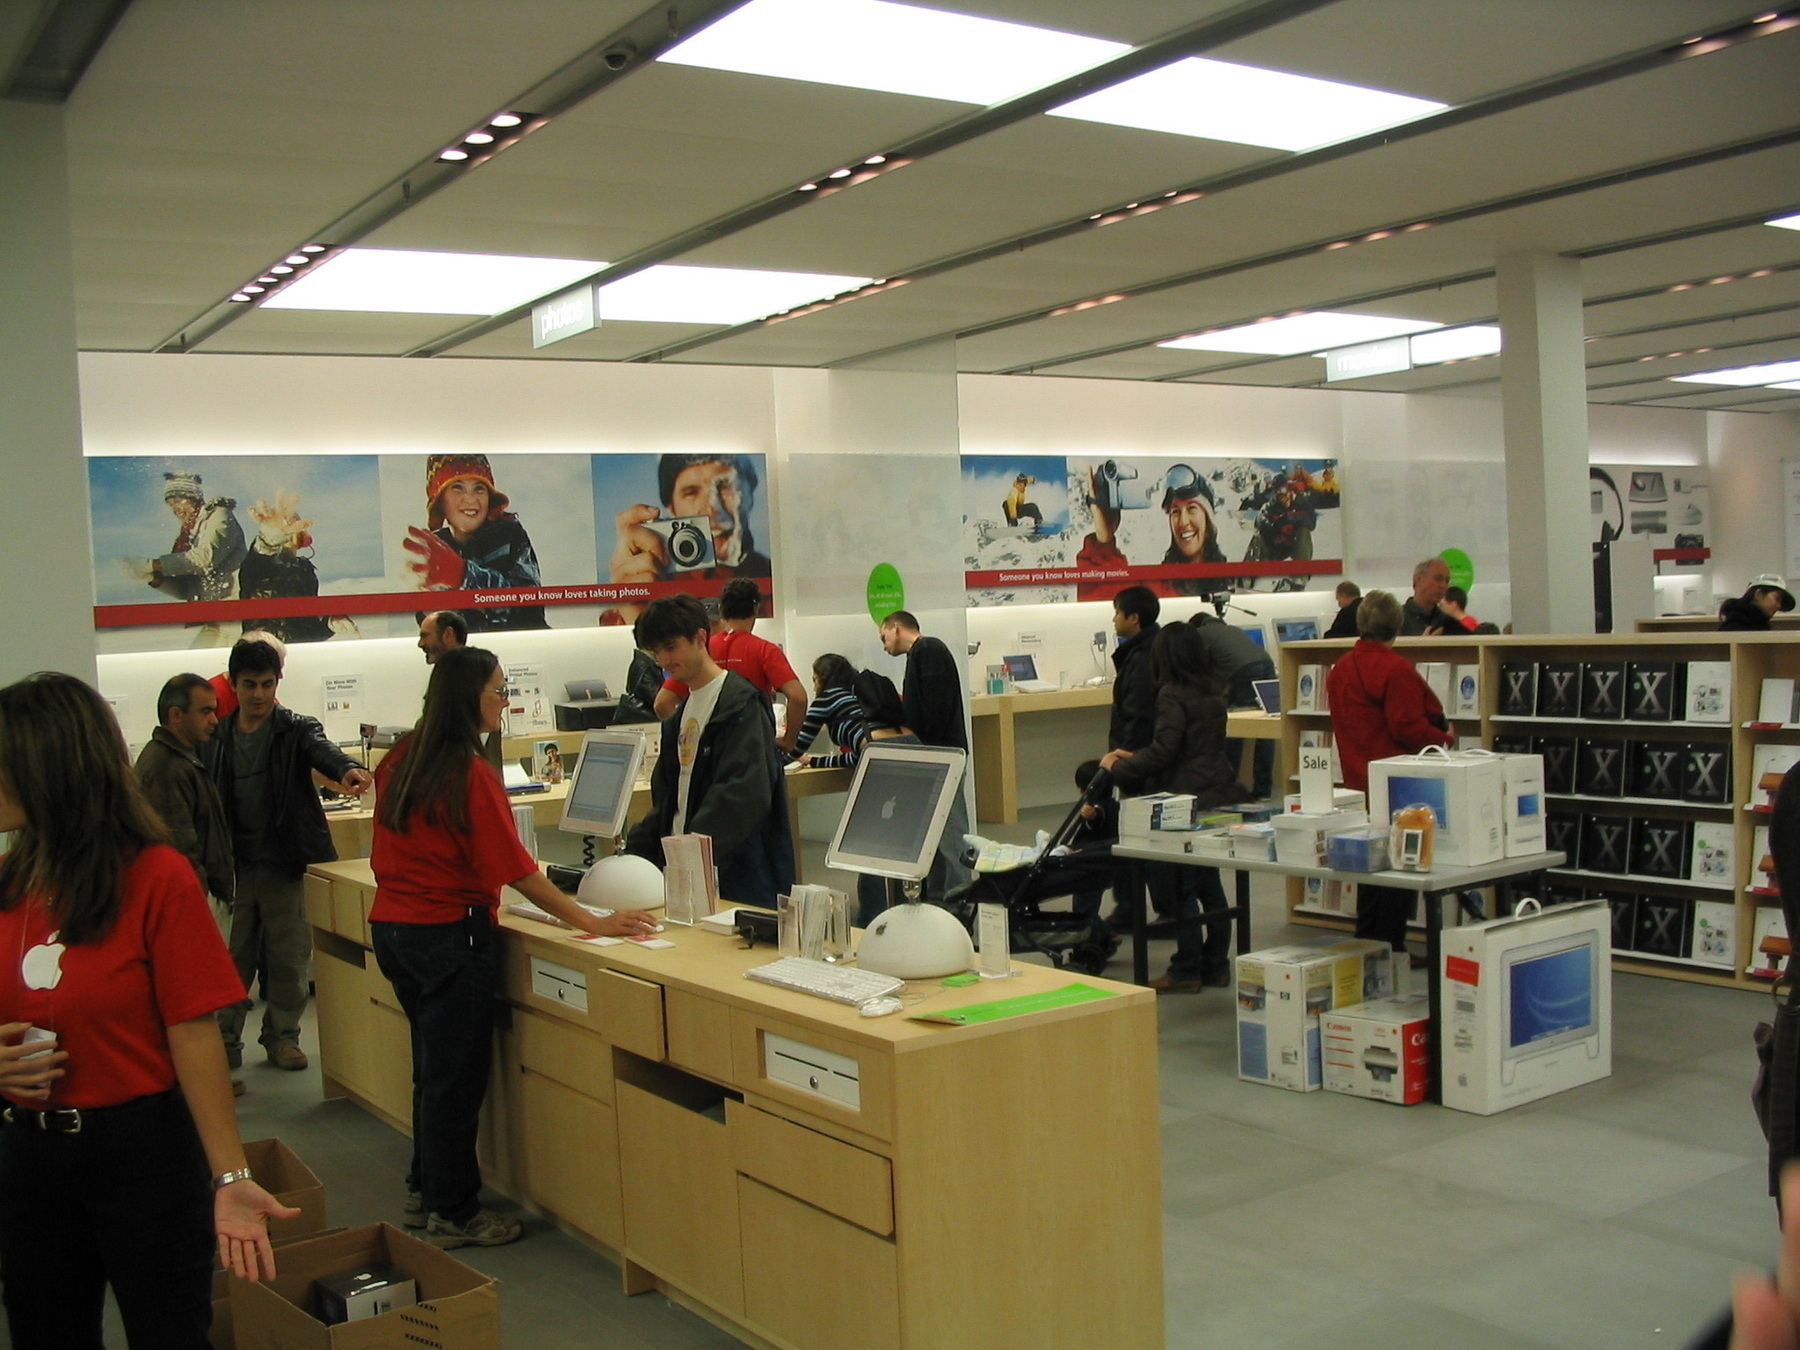 Apple Store workers in red t-shirts with white Apple logos take care of customers at cash registers controlled by iMac G4s.